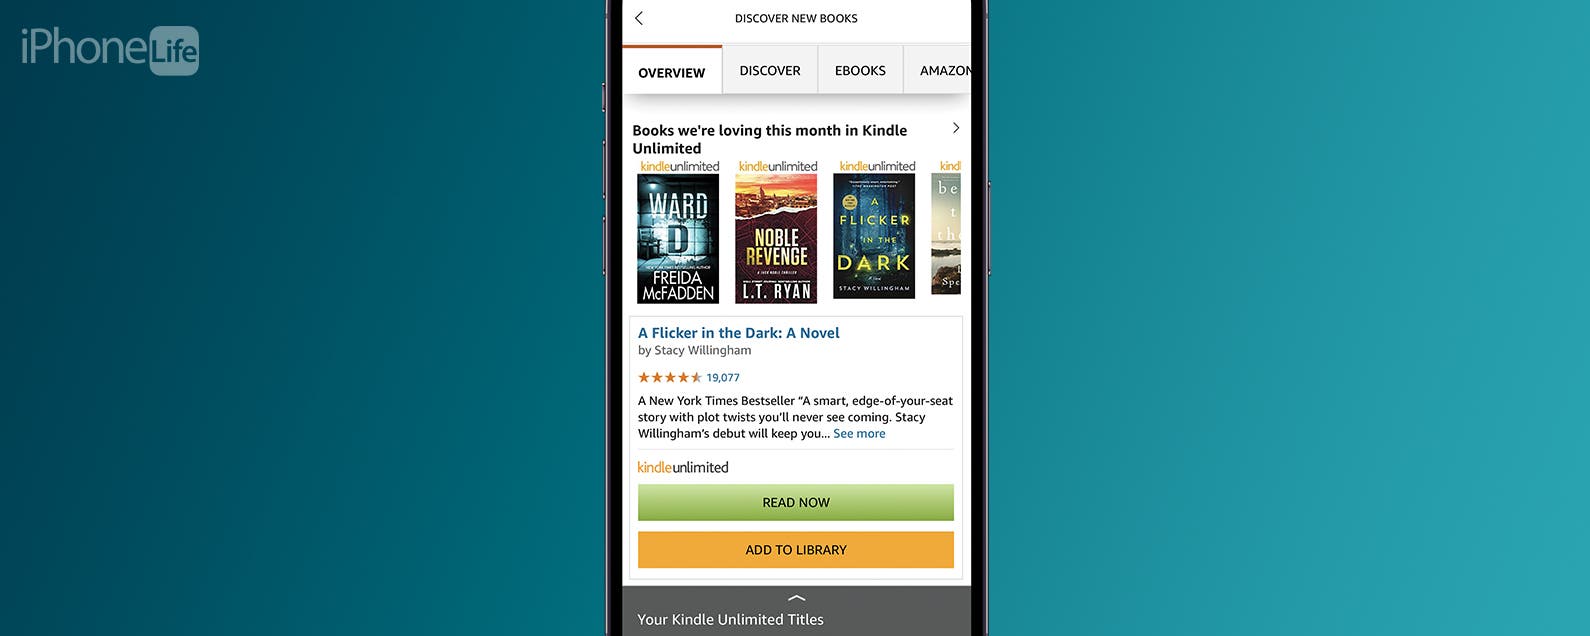 Best Kindle deal: Get access to the Kindle Unlimited library of e